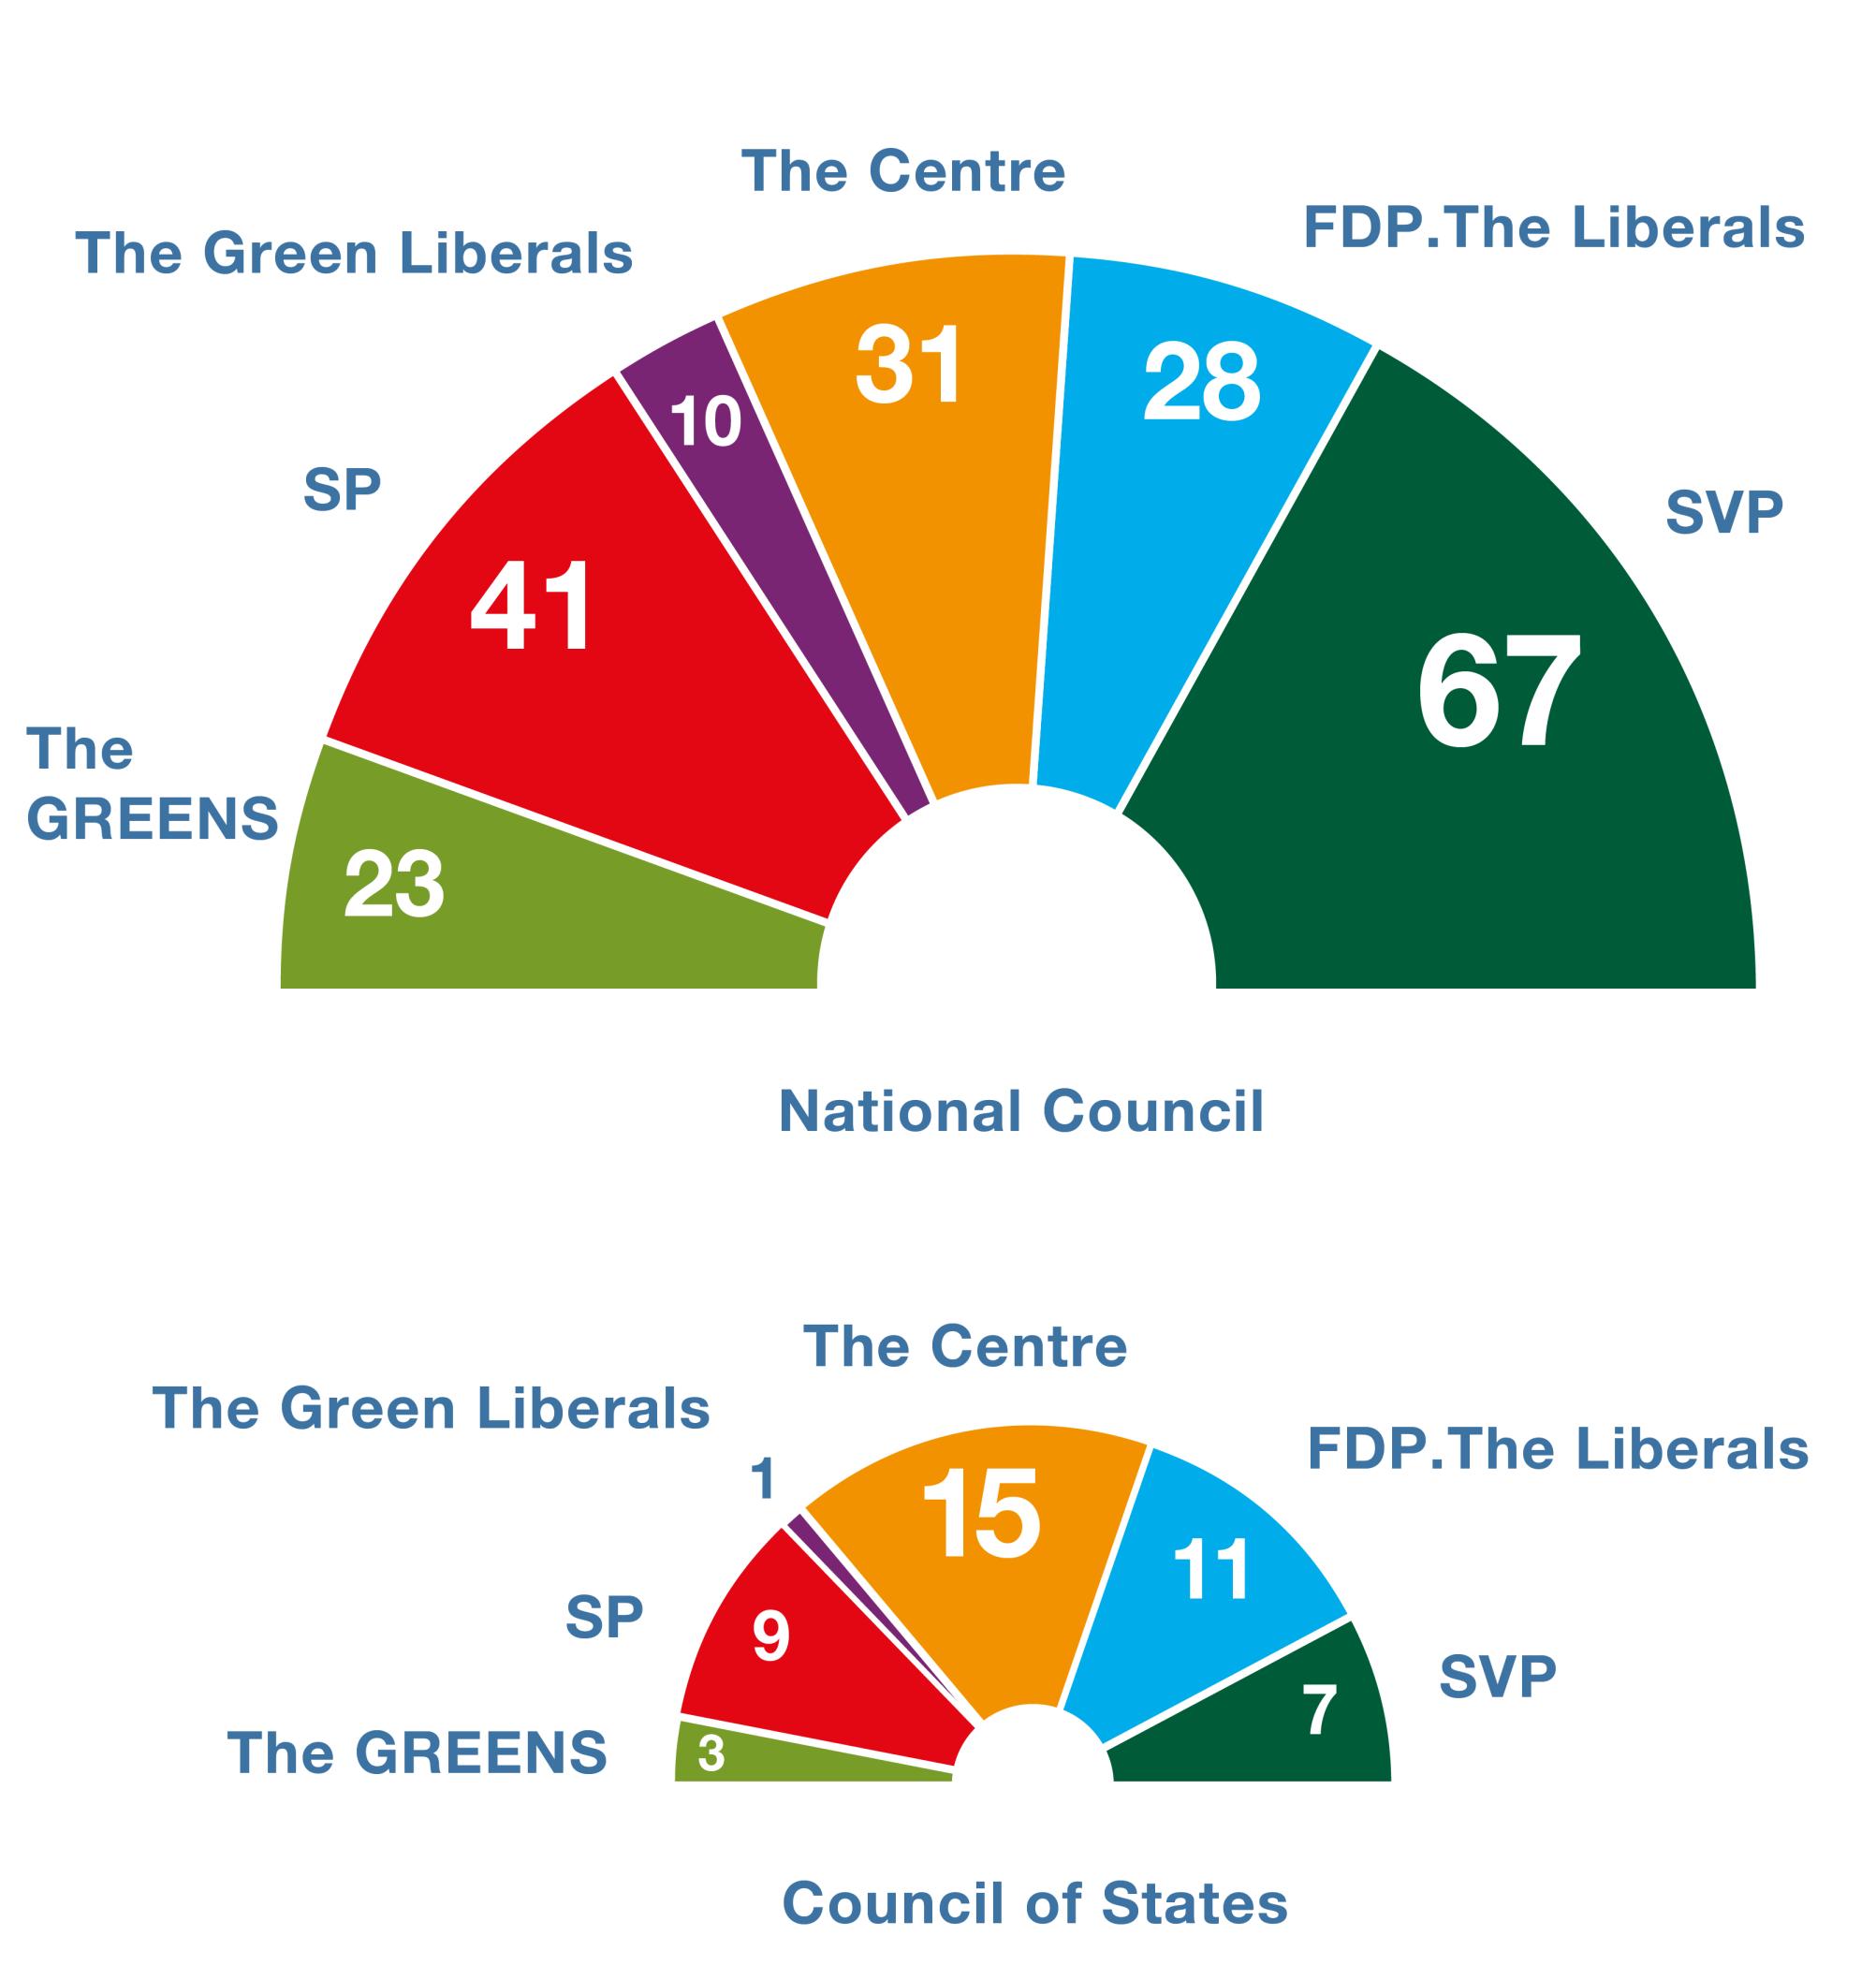 A pie chart shows the breakdown of the National Council into six parliamentary groups.  The SVP is the strongest group with 67 members.  The SP is the second largest group with 41 members.  The Centre group has 31 members; the FDP, 28 members; and the Greens, 23 members.  The smallest group is the Green Liberals with 10 members.  Another pie chart shows the breakdown of the Council of States into five parliamentary groups.  The strongest groups are the Centre group with 15 members and the FDP with 11 members.  The SP has 9 members, the SVP, 7 members; and the Greens, 3 members.